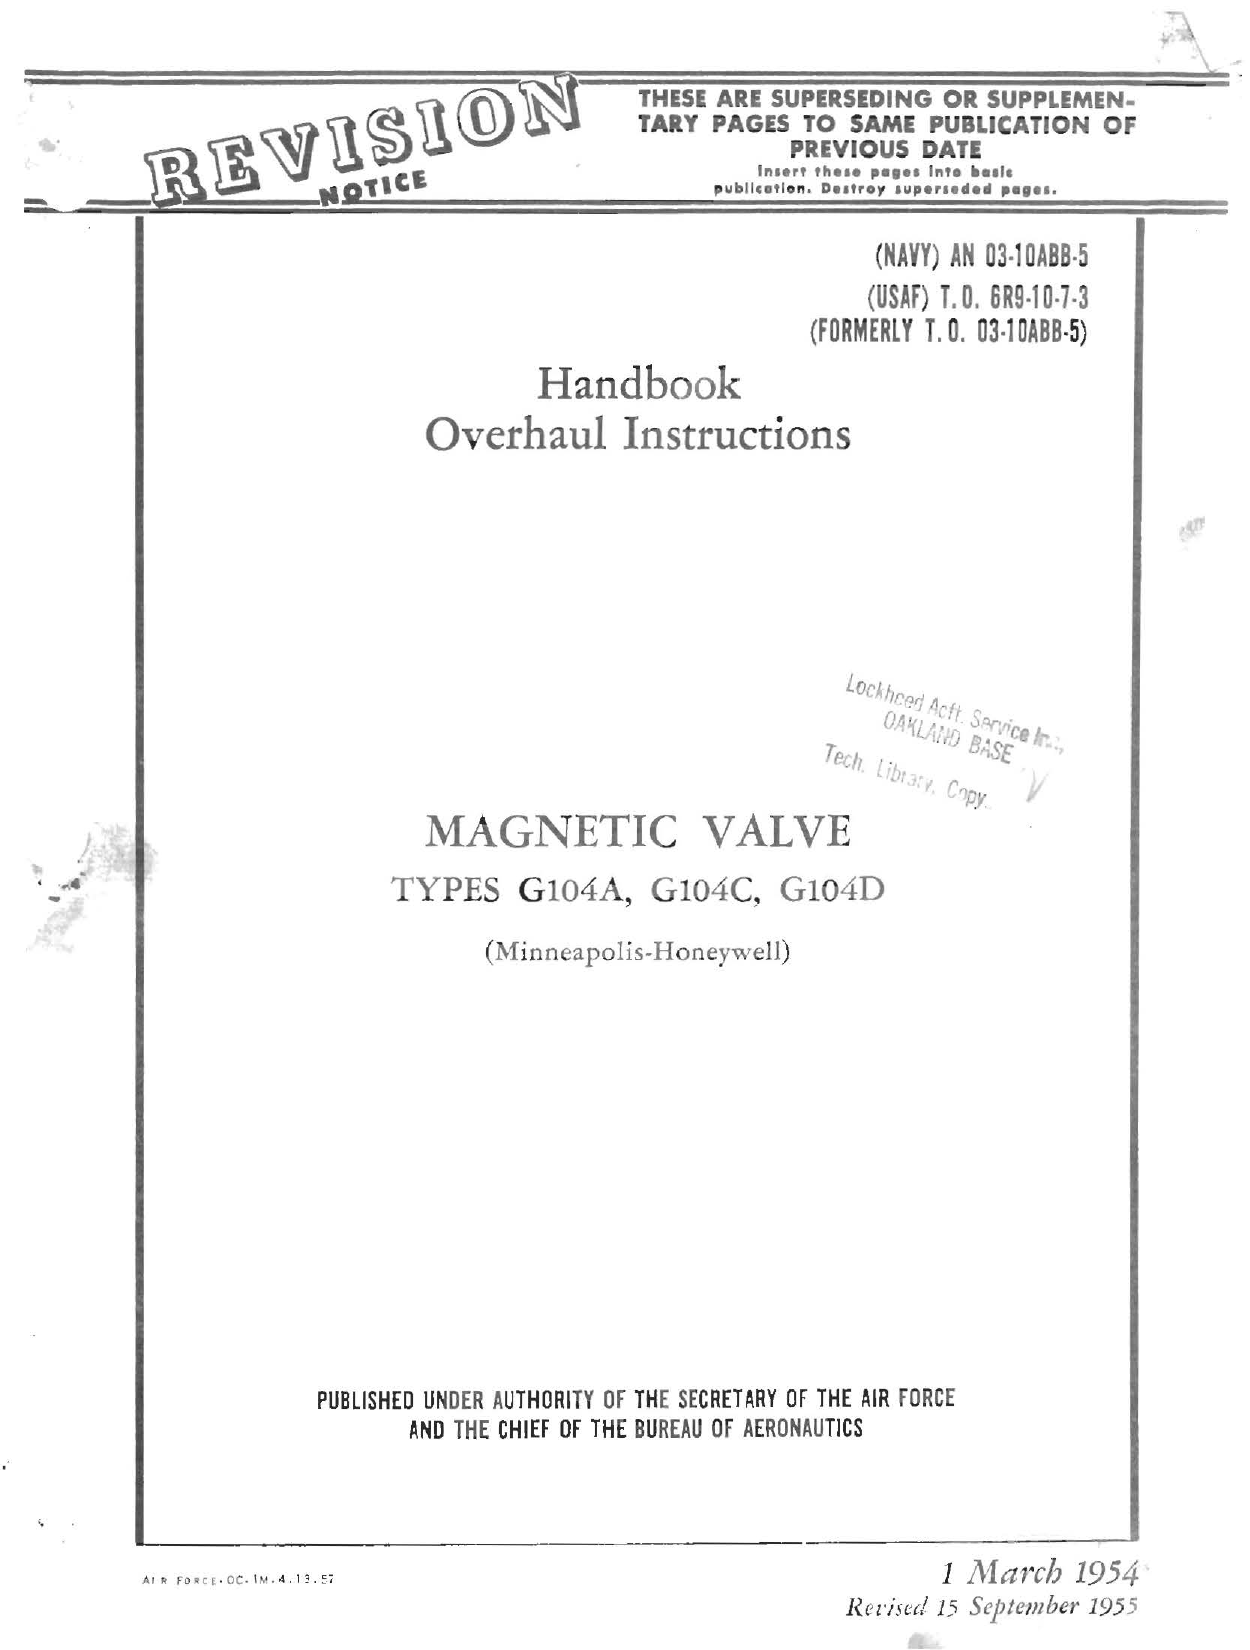 Sample page 1 from AirCorps Library document: Overhaul Instructions for Magnetic Valve - Types G104A, G104C, and G104D 